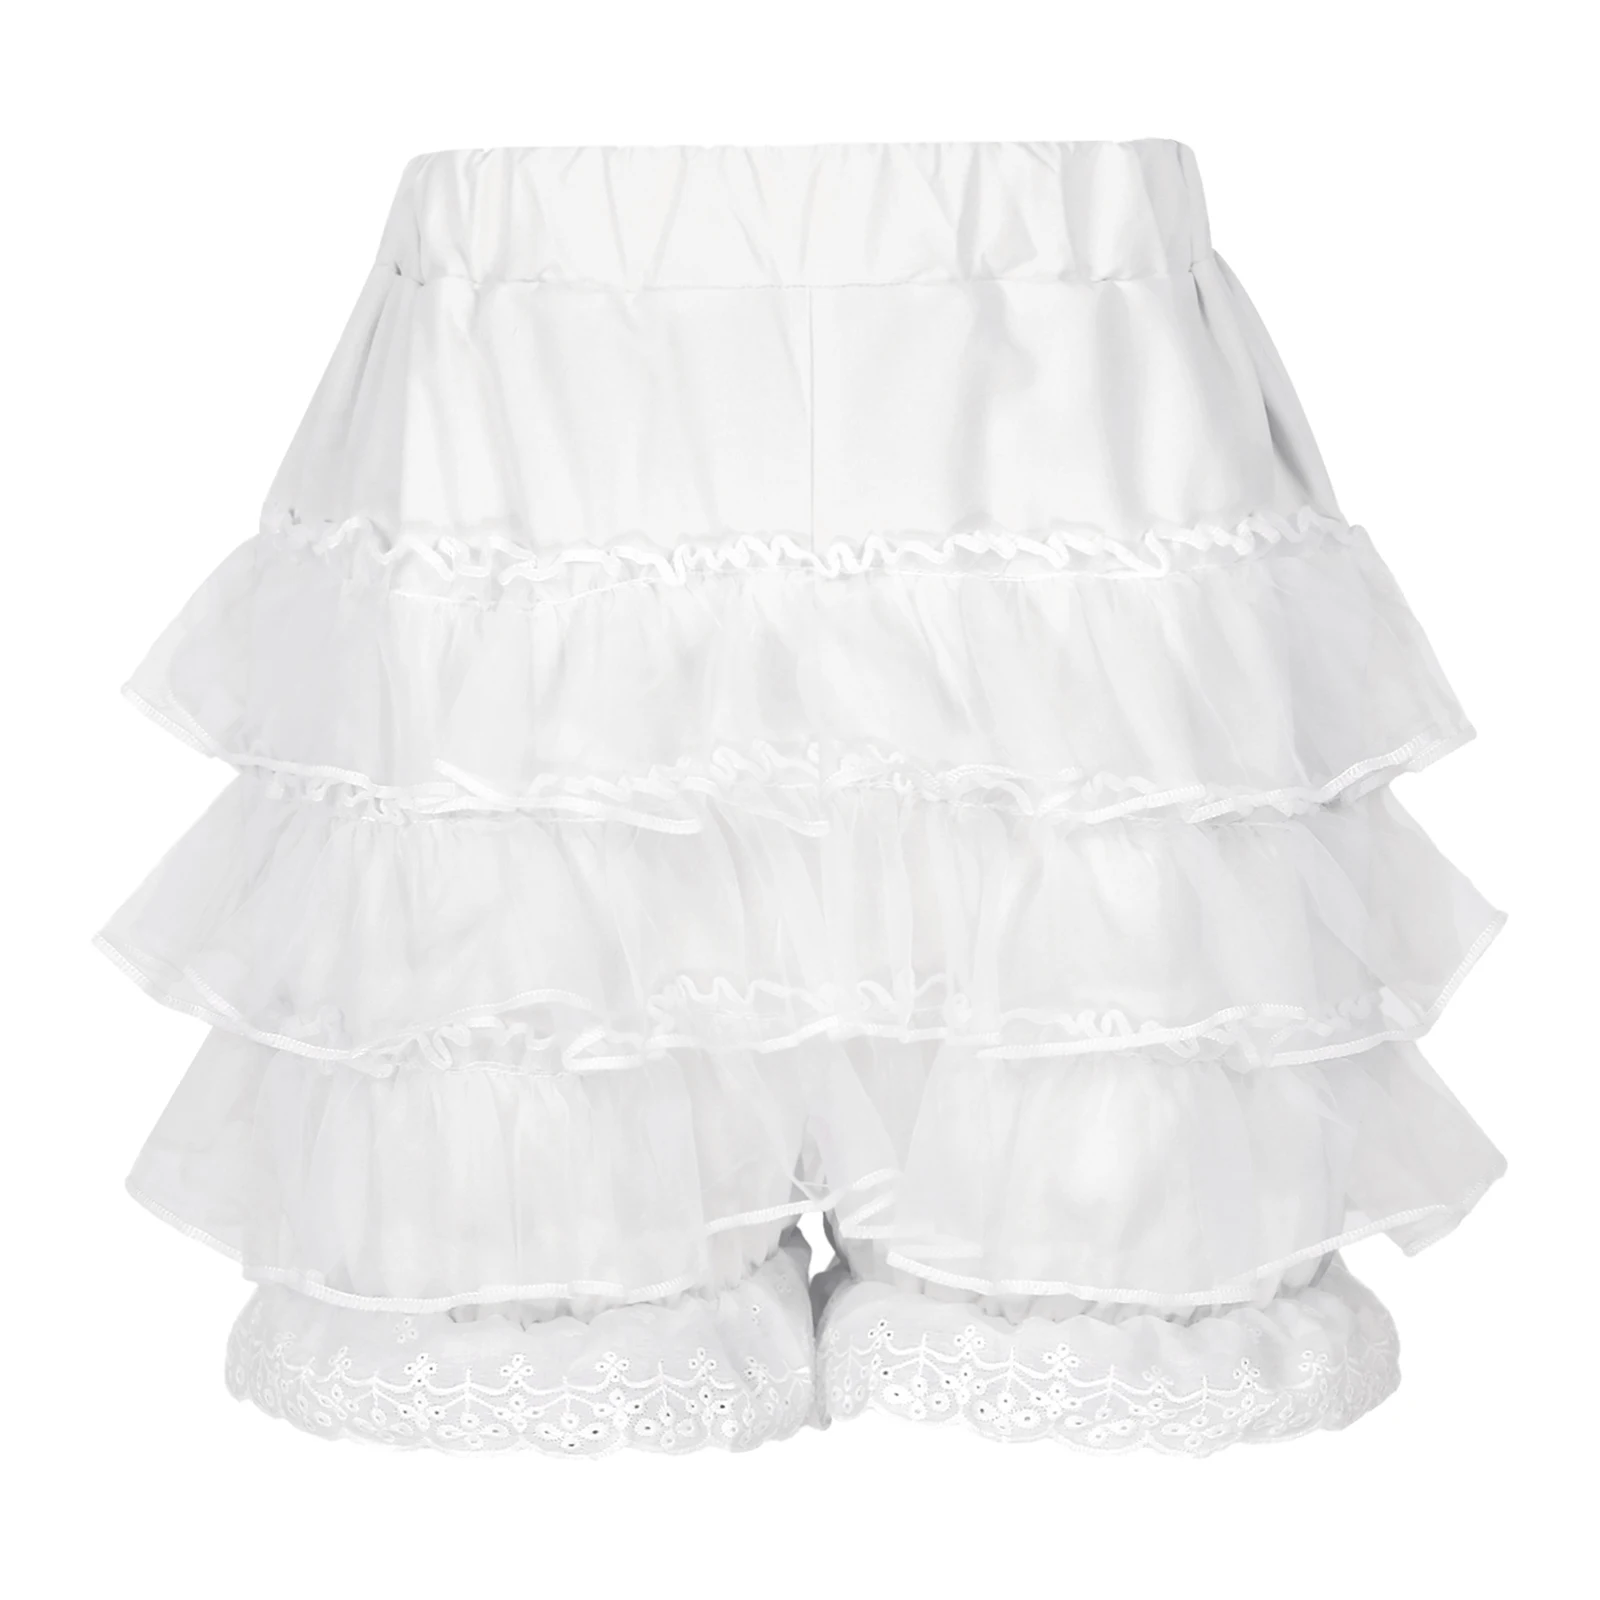 

Women Lace Trim Tiered Ruffles Skirted Shorts Fashion White Elastic Waistband Frilly Bloomers Lolita Shorts Casual Daily Clothes